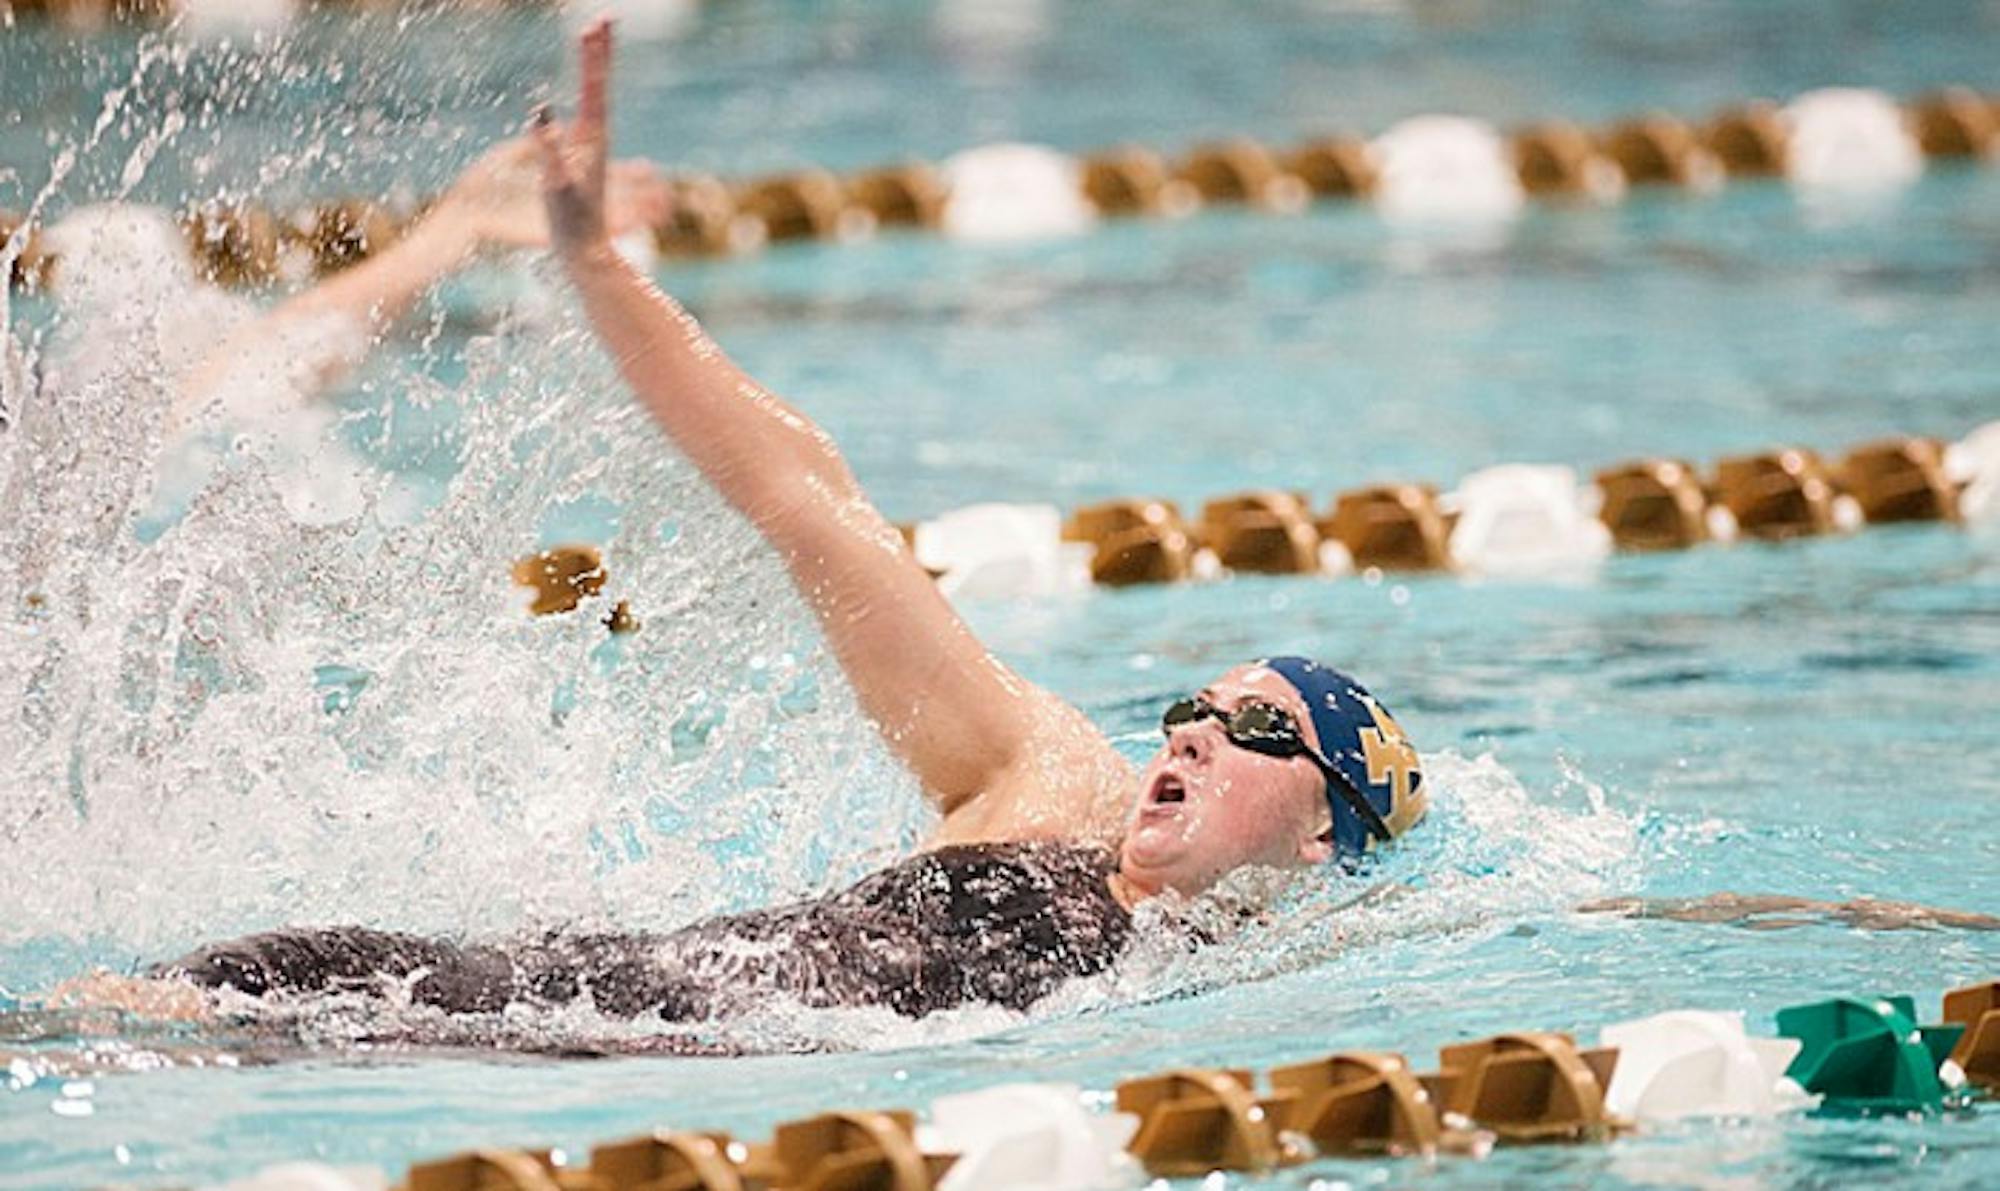 Freshman Katie Miller competes in the 200-yard individual medley in the Shamrock Invitational on Jan. 31 at Rolfs Aquatic Center.